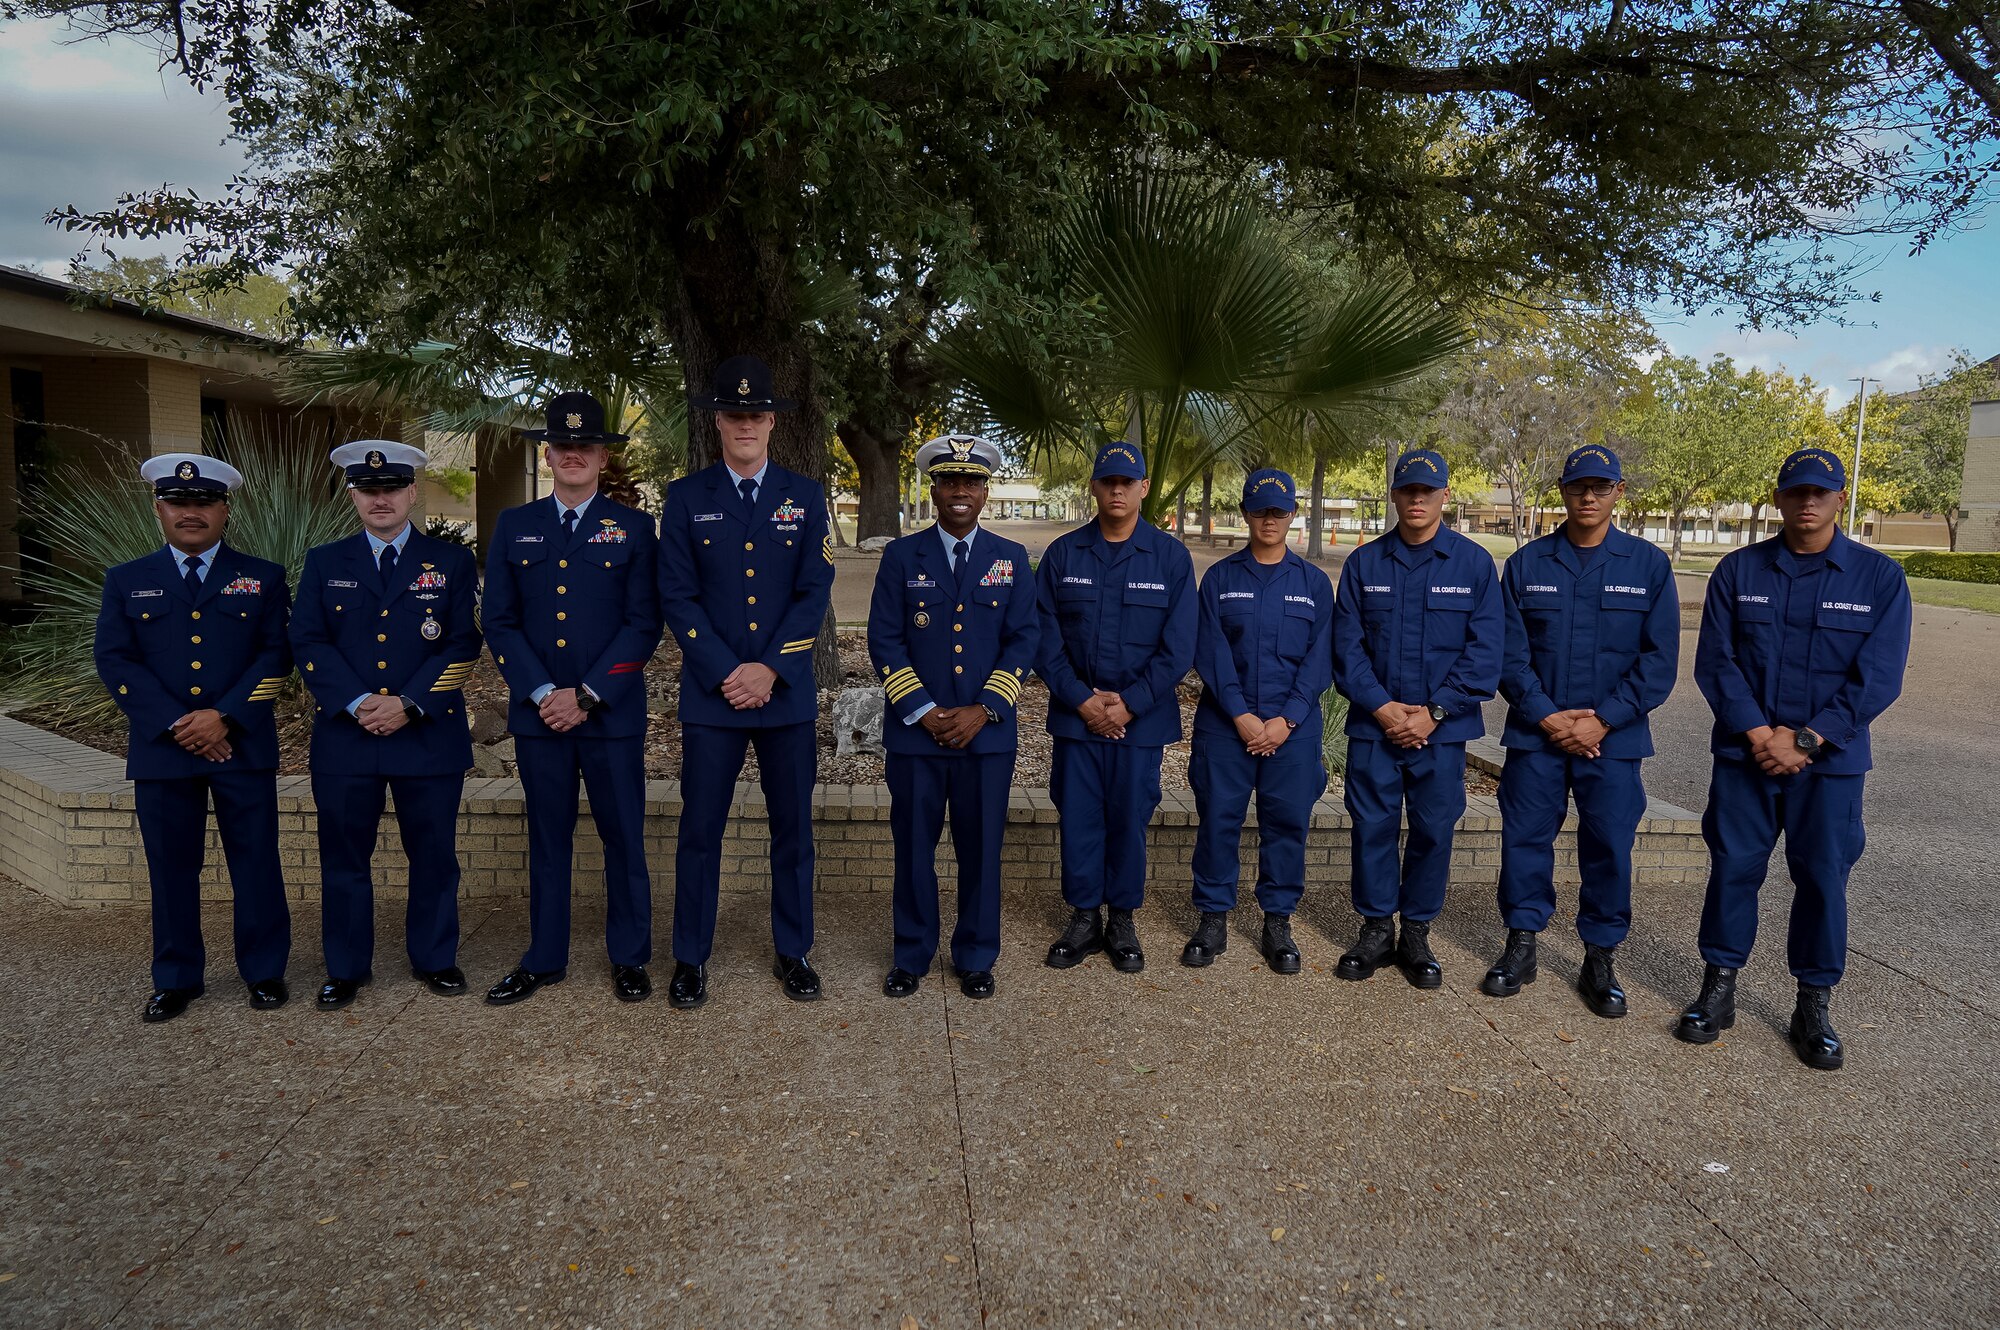 A group of people dressed in a dark blue Coast Guard uniform stand side by side posing for the camera. It is a full body shot.